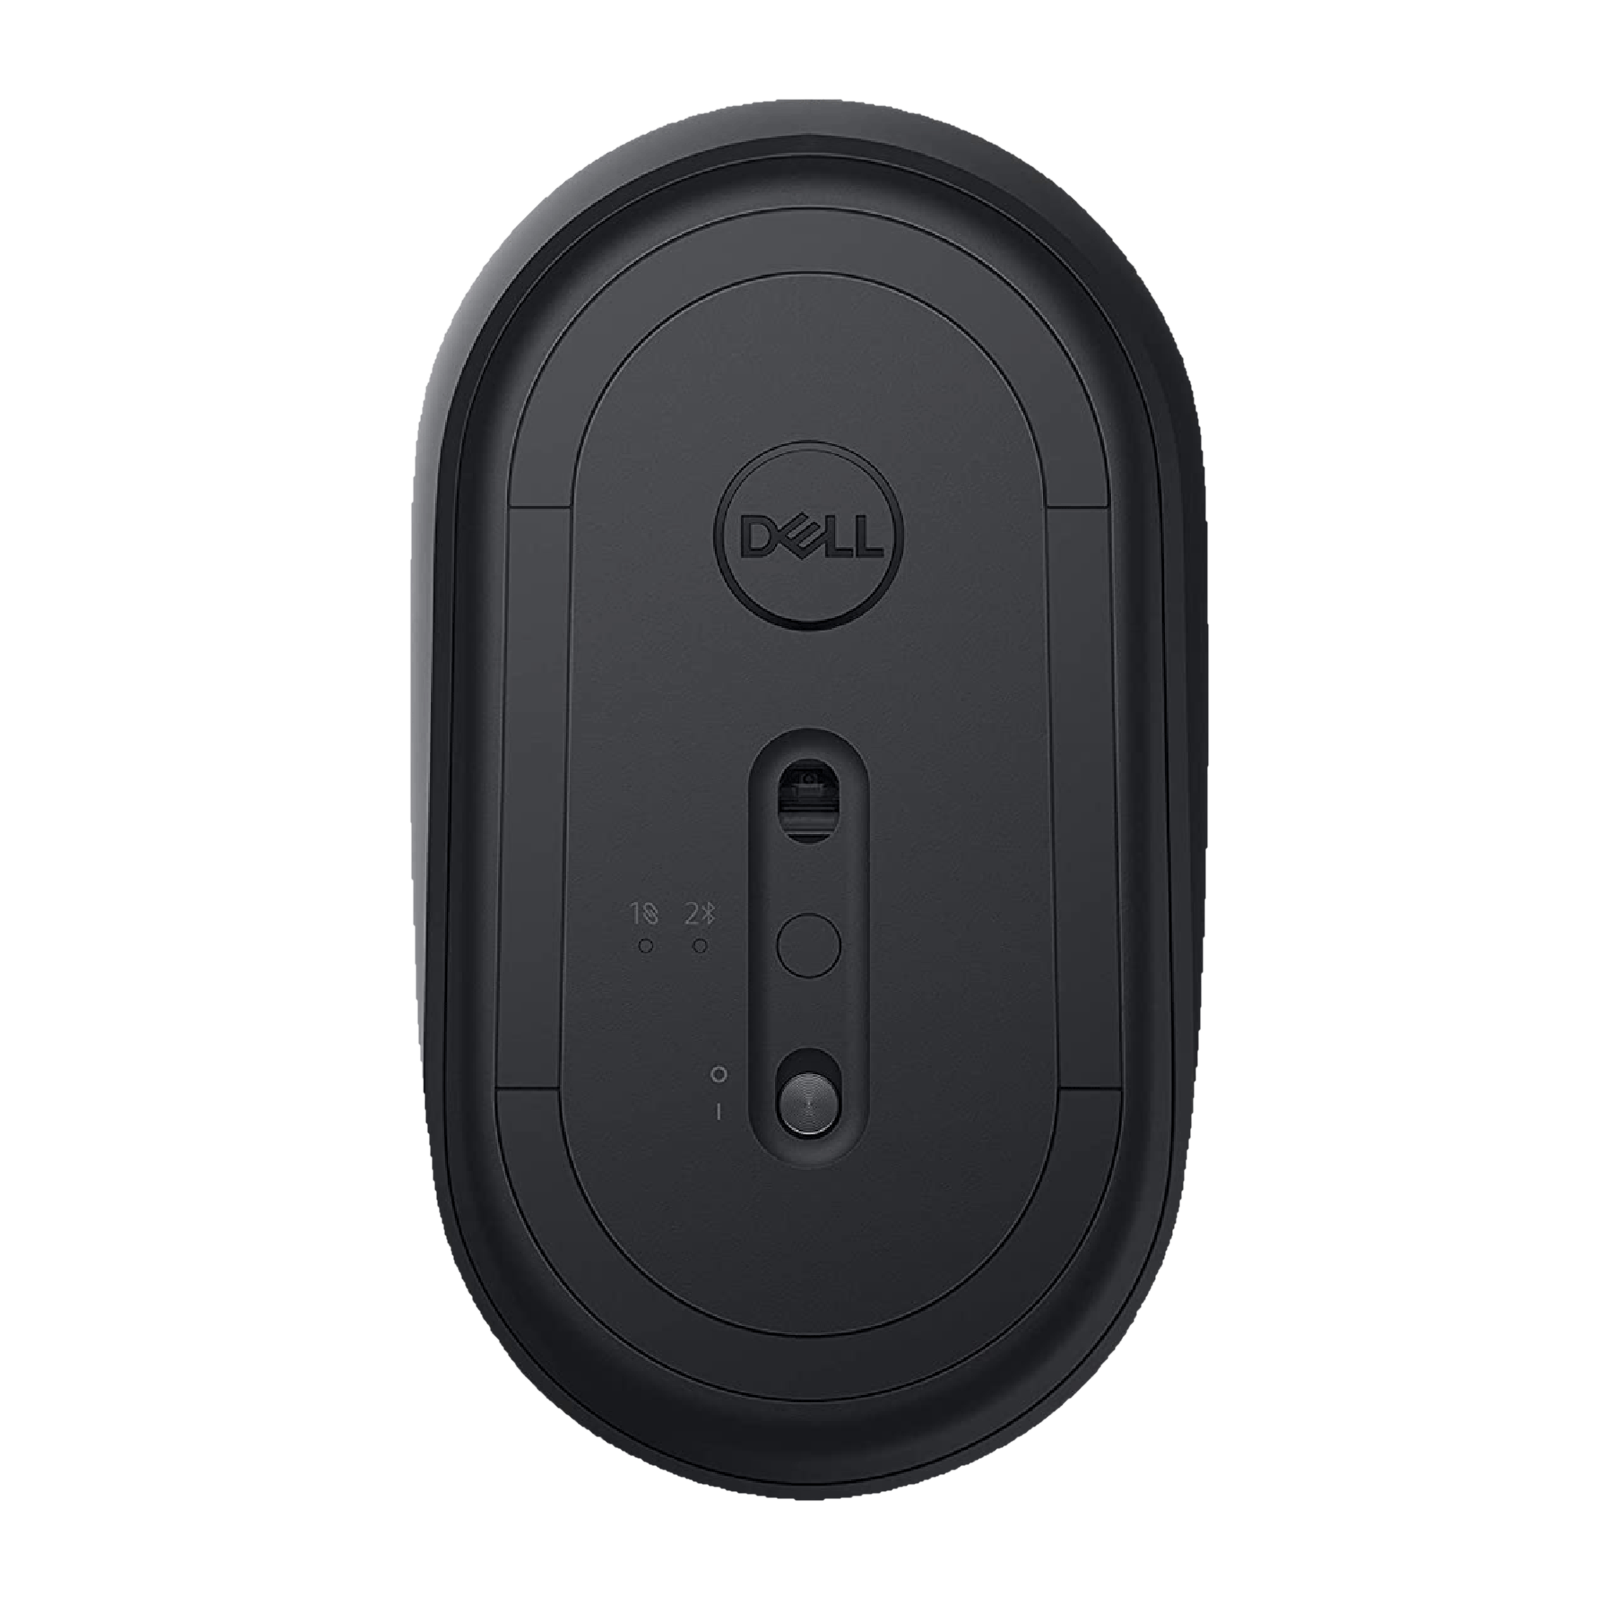 buy-dell-mobile-wireless-optical-mouse-16000-dpi-easy-pairing-black-online-croma